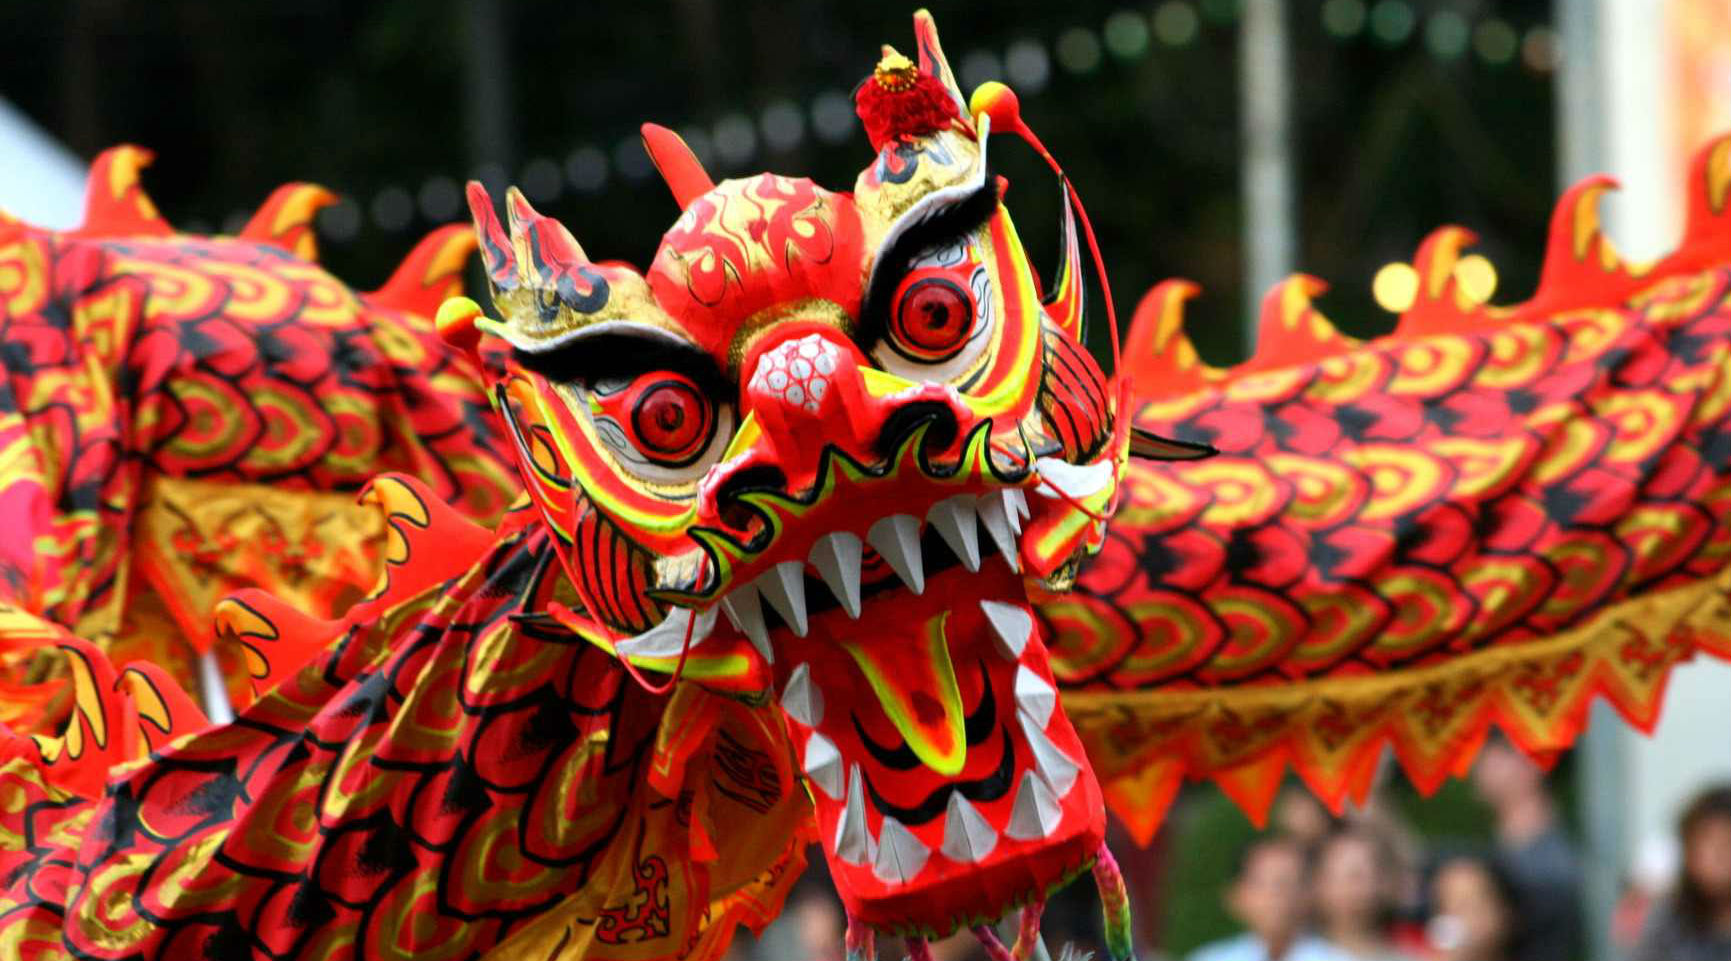 California to Introduce Lunar New Year as an Official Holiday